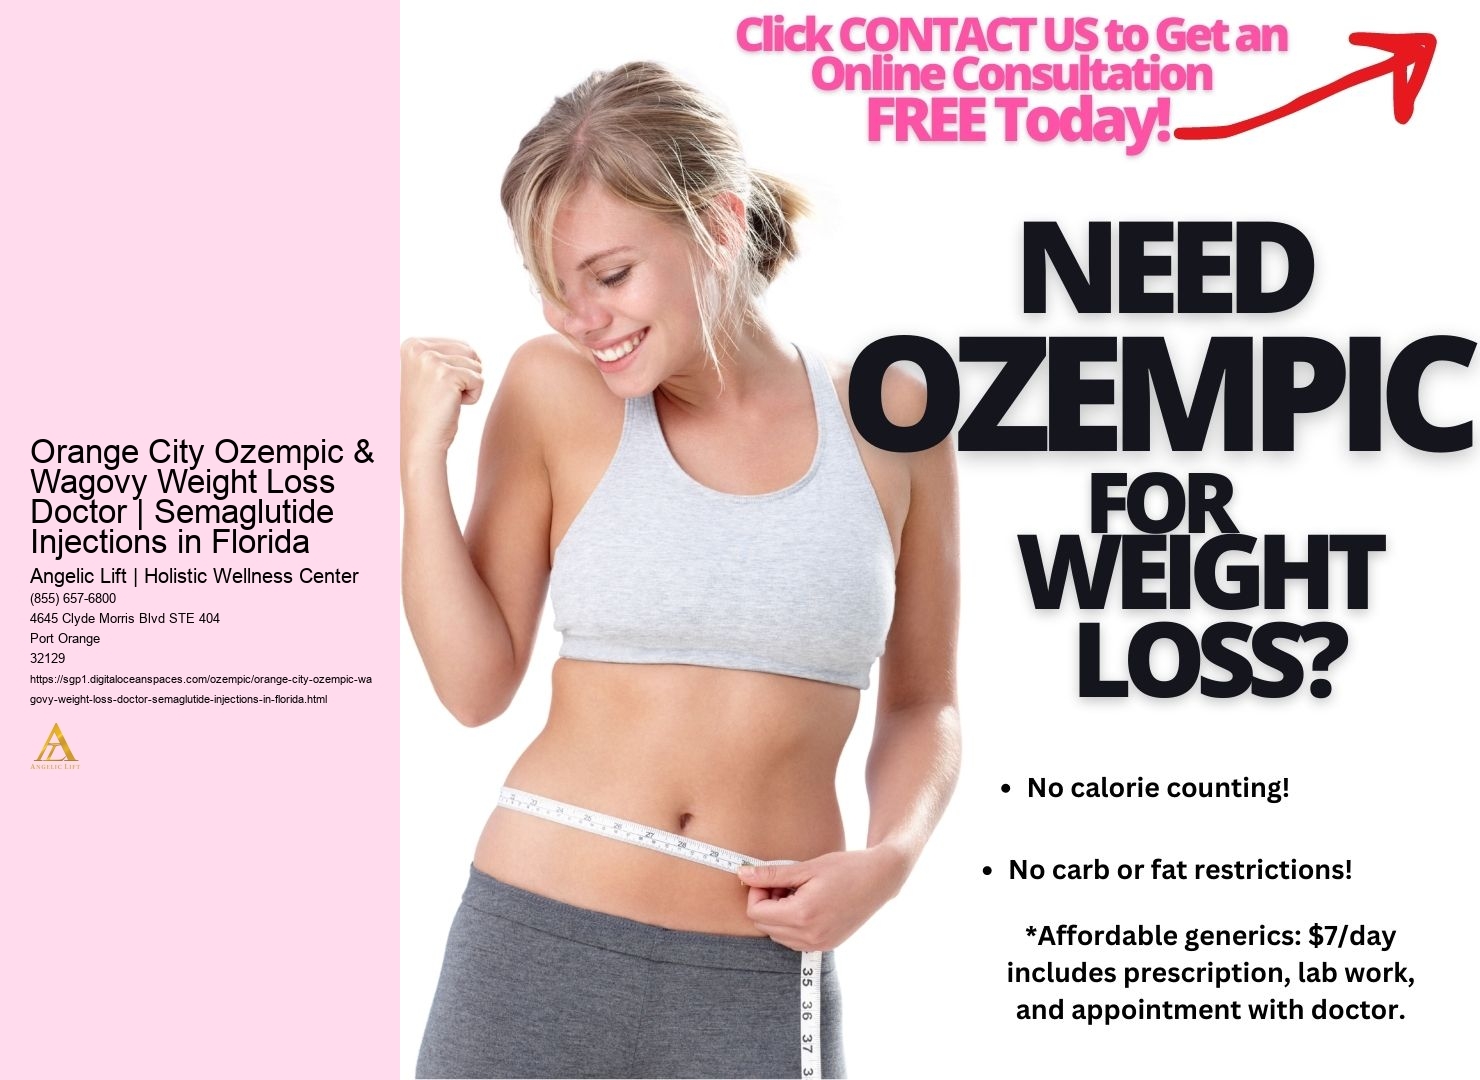 Orange City Ozempic & Wagovy Weight Loss Doctor | Semaglutide Injections in Florida